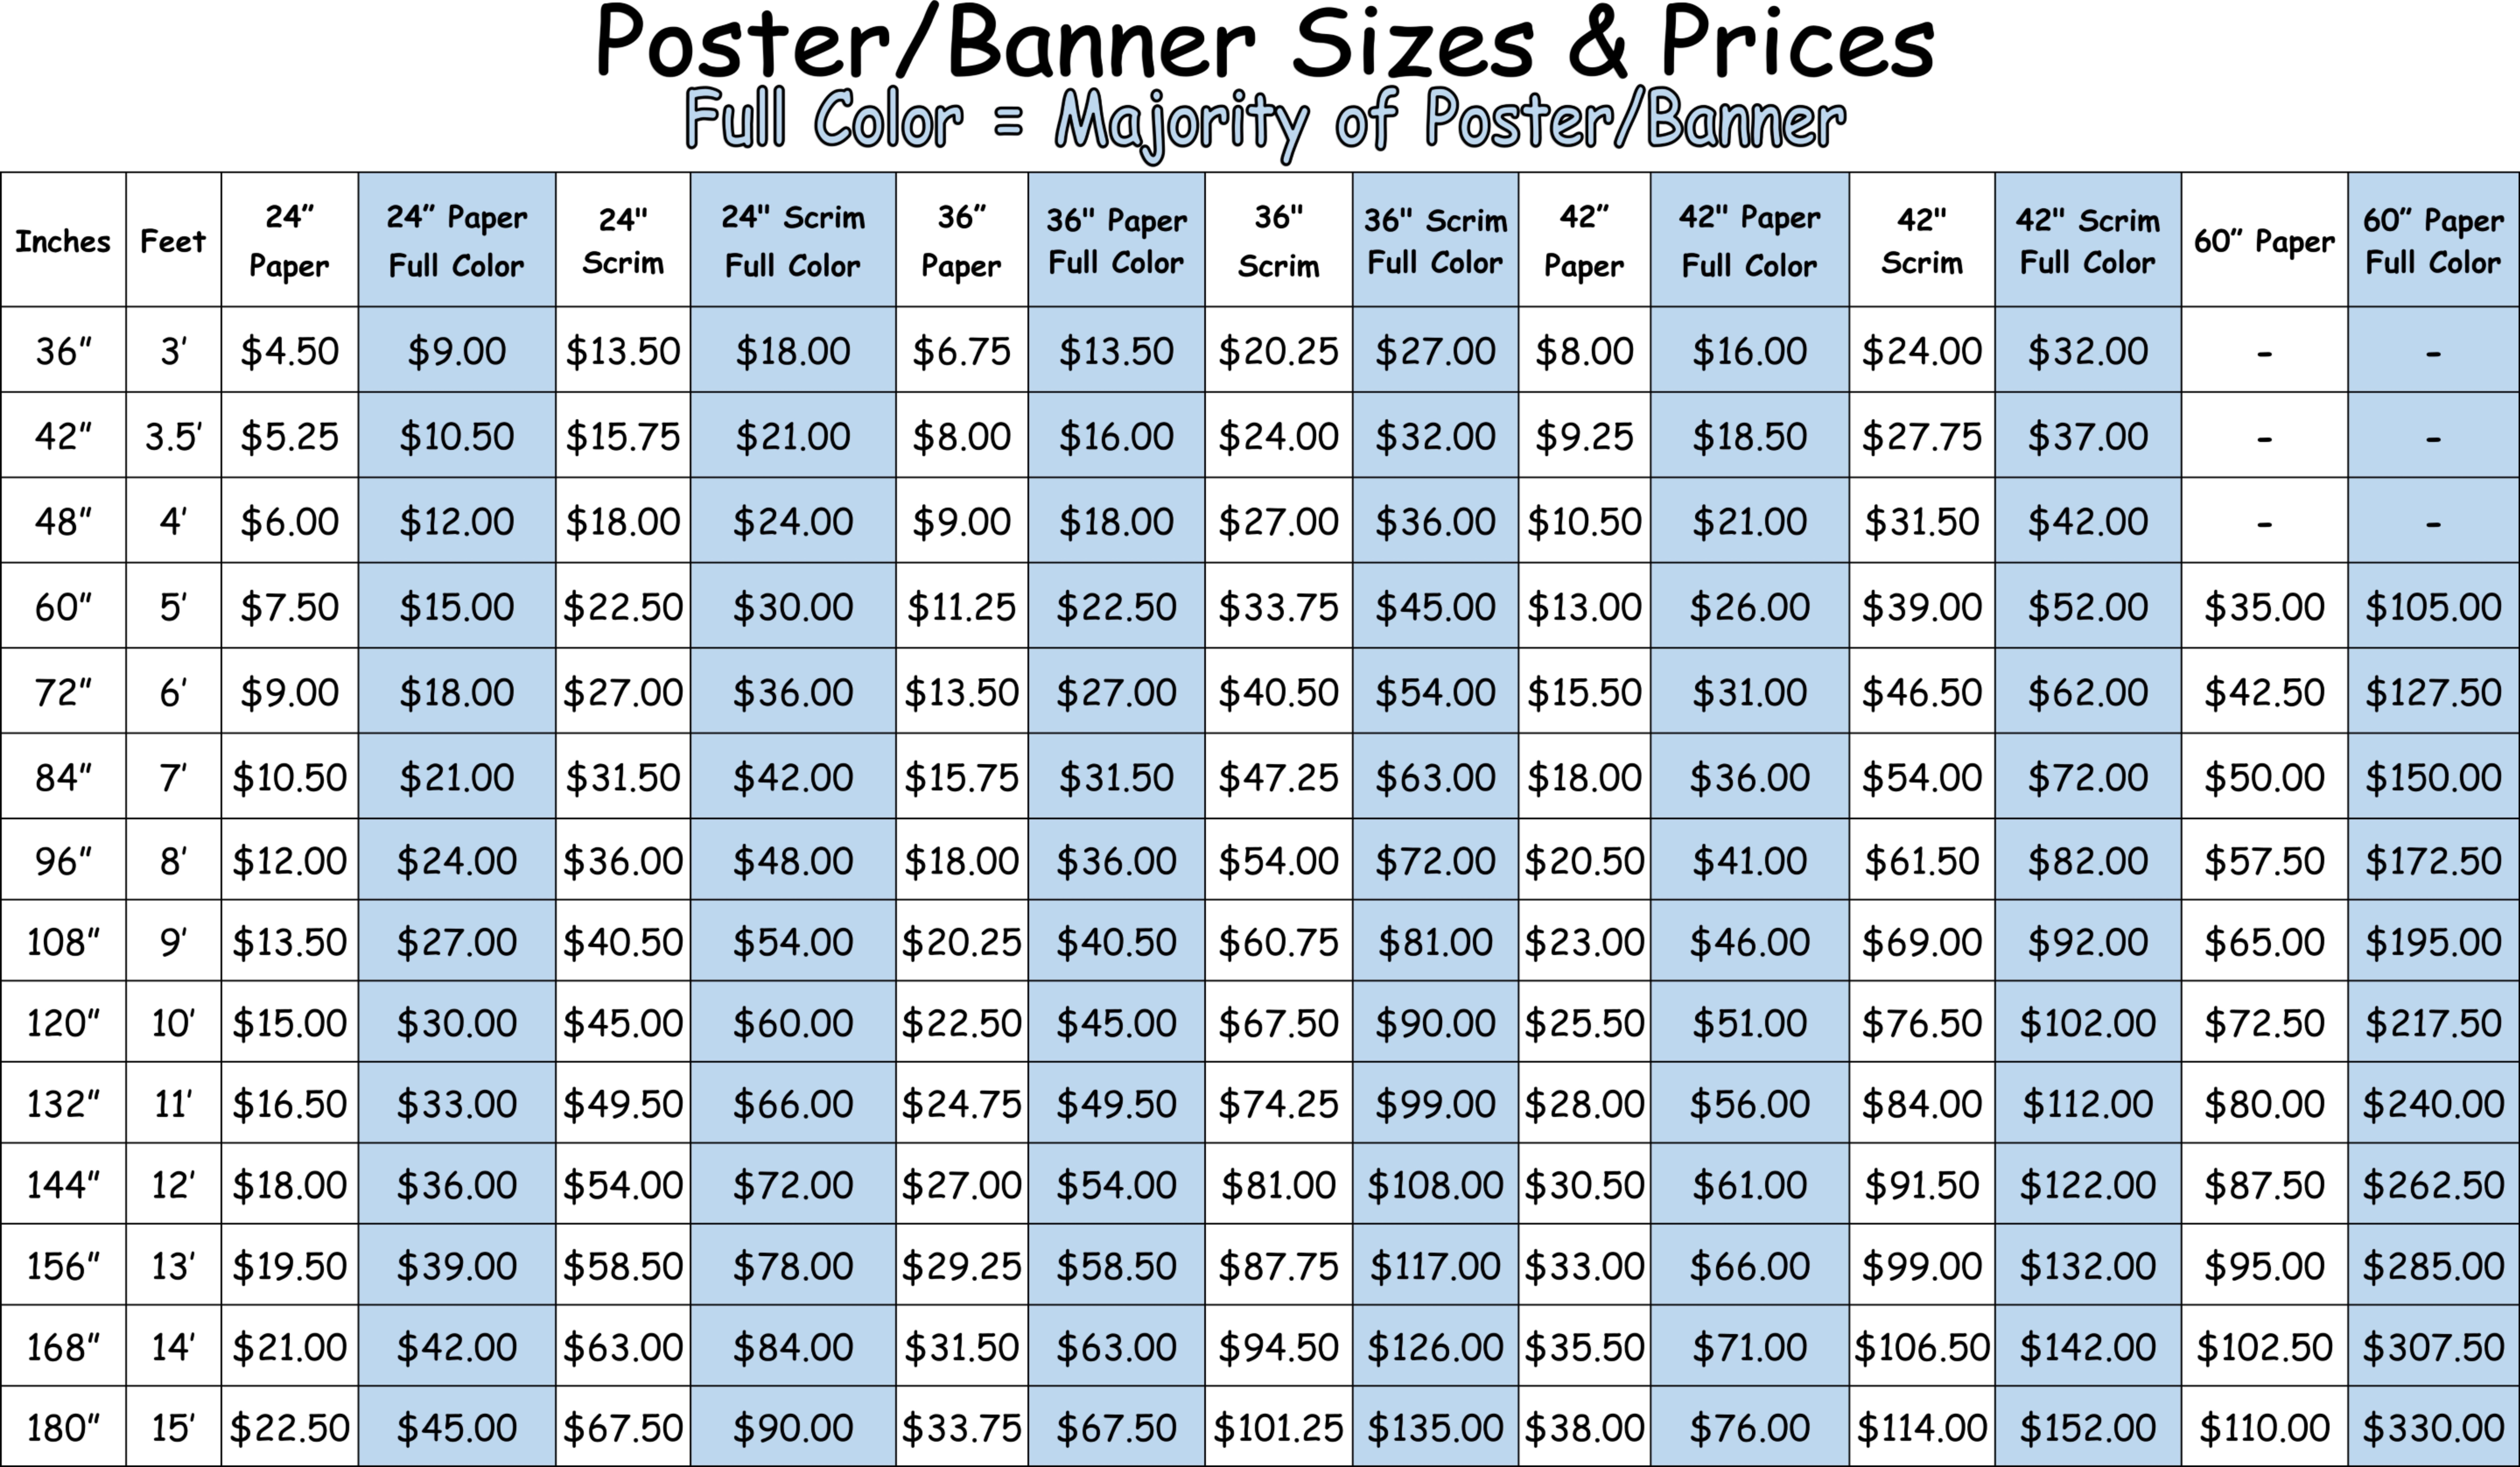 Poster/Banner Sizes & Prices